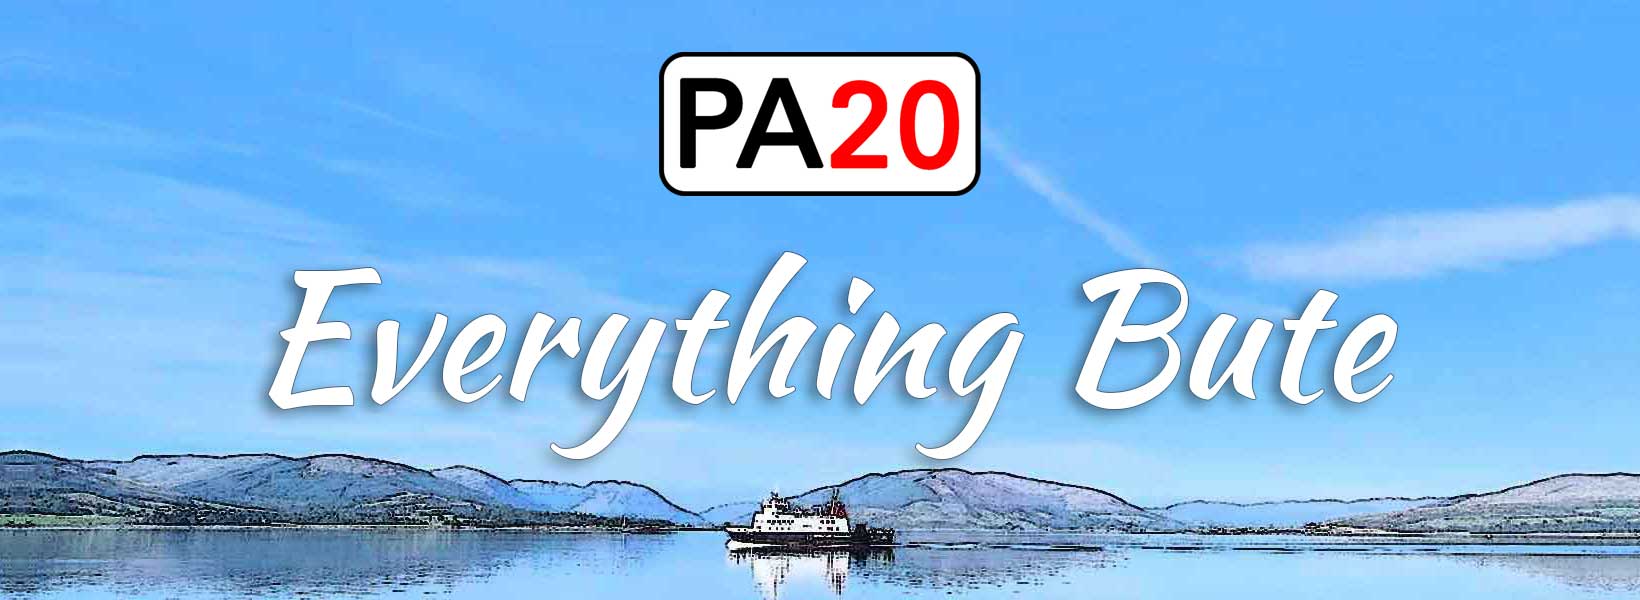 PA20 mobile page header